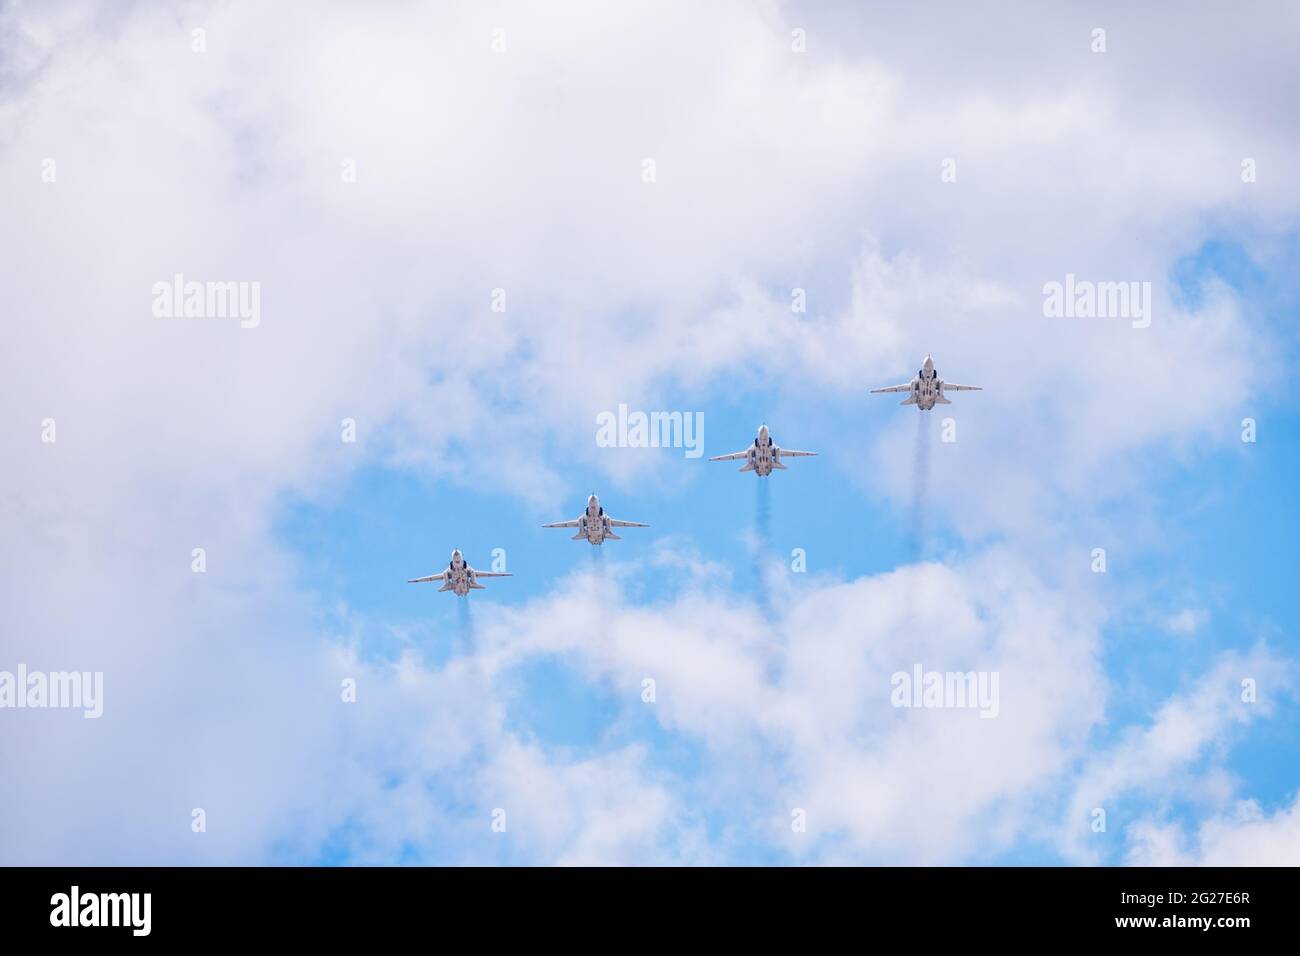 Moscow, Russia - May, 05, 2021: Sukhoi SU-24 flying over Red Square during the preparation of the Victory Day May 9 parade. Stock Photo